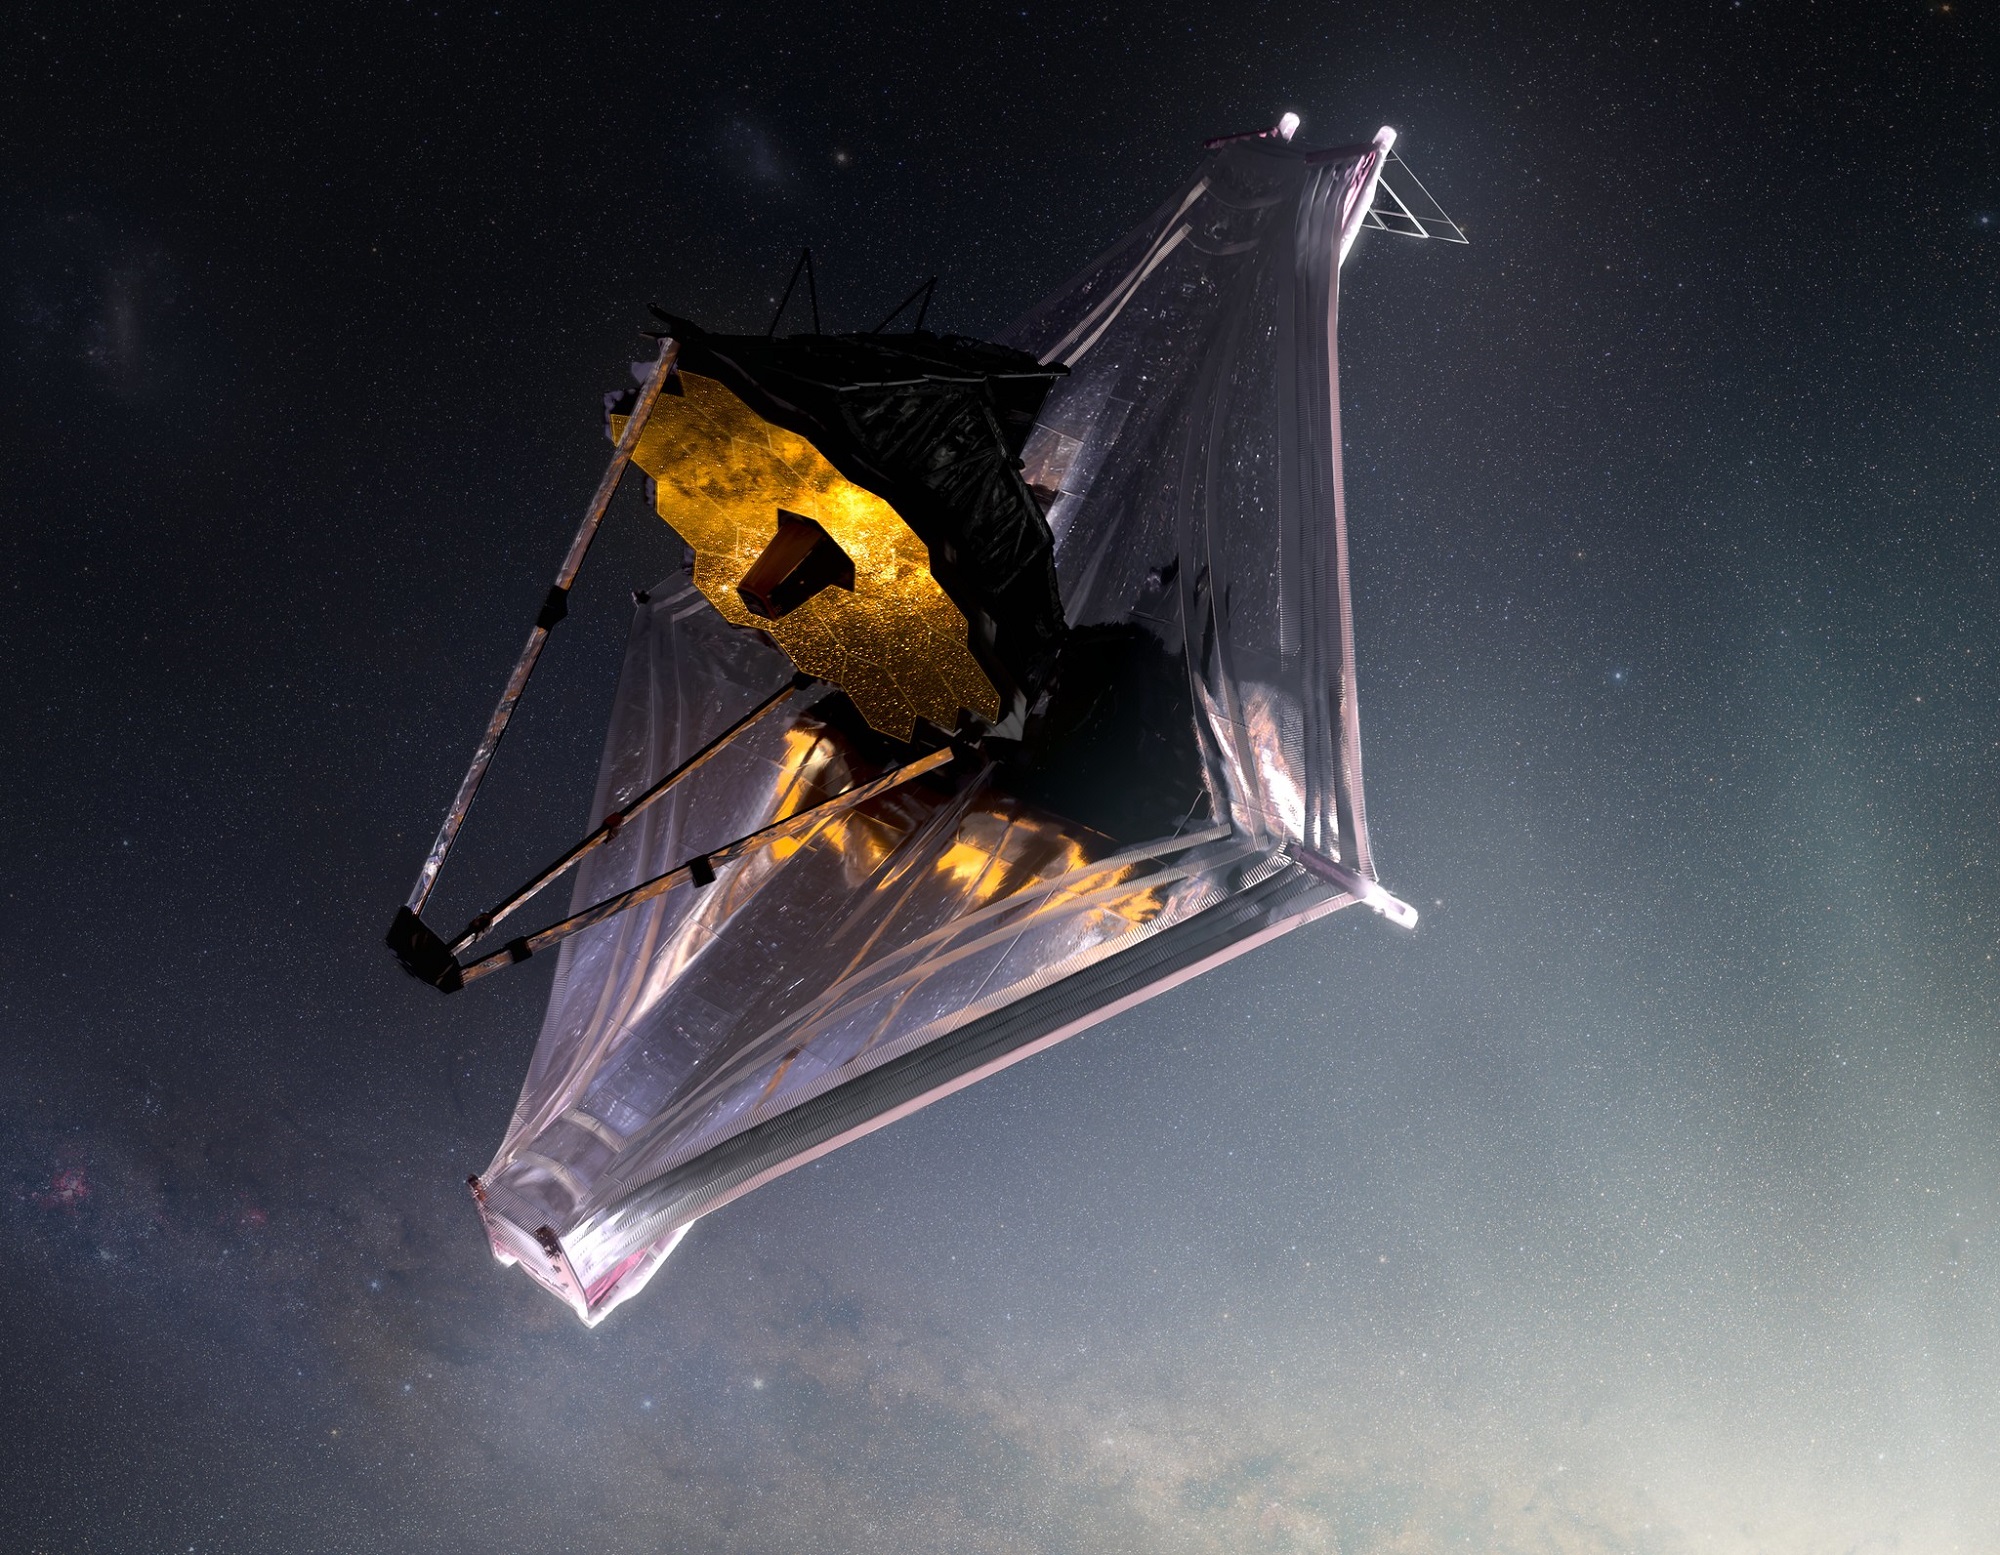 17 images to count down to the James Webb Space Telescope launch